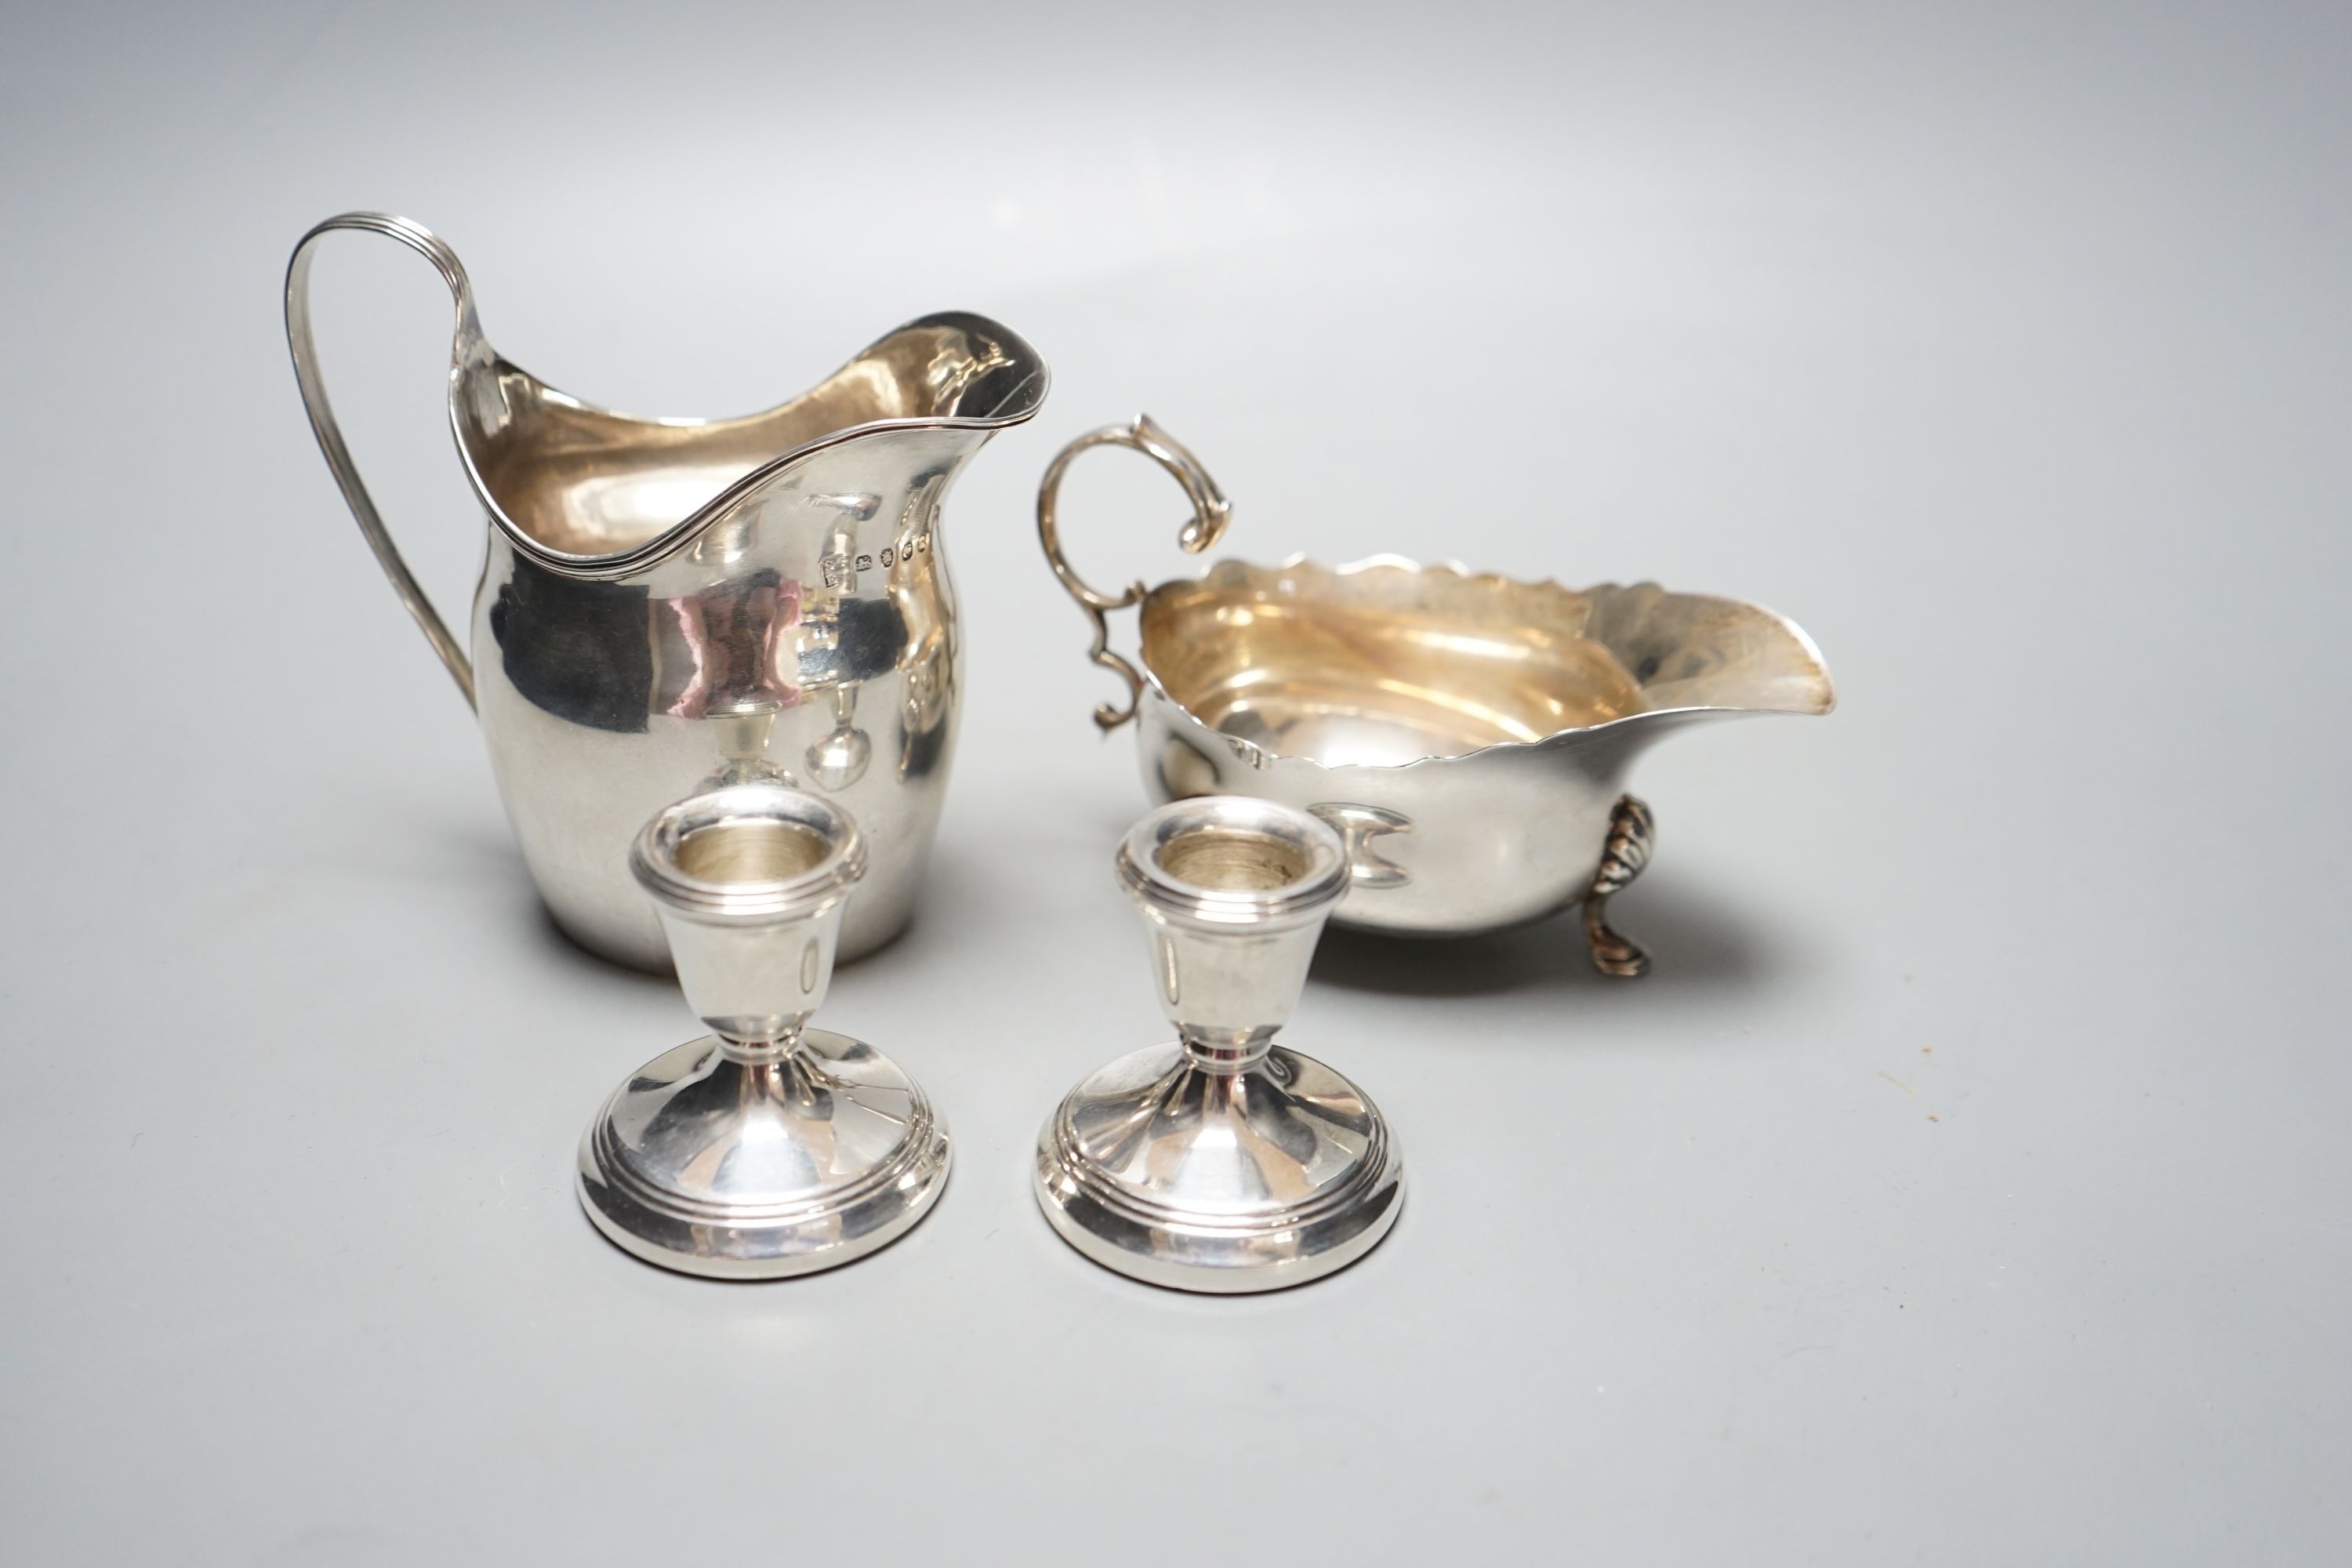 A George III silver jug, London, 1798, a silver sauce boat and pair of silver mounted dwarf candlesticks.